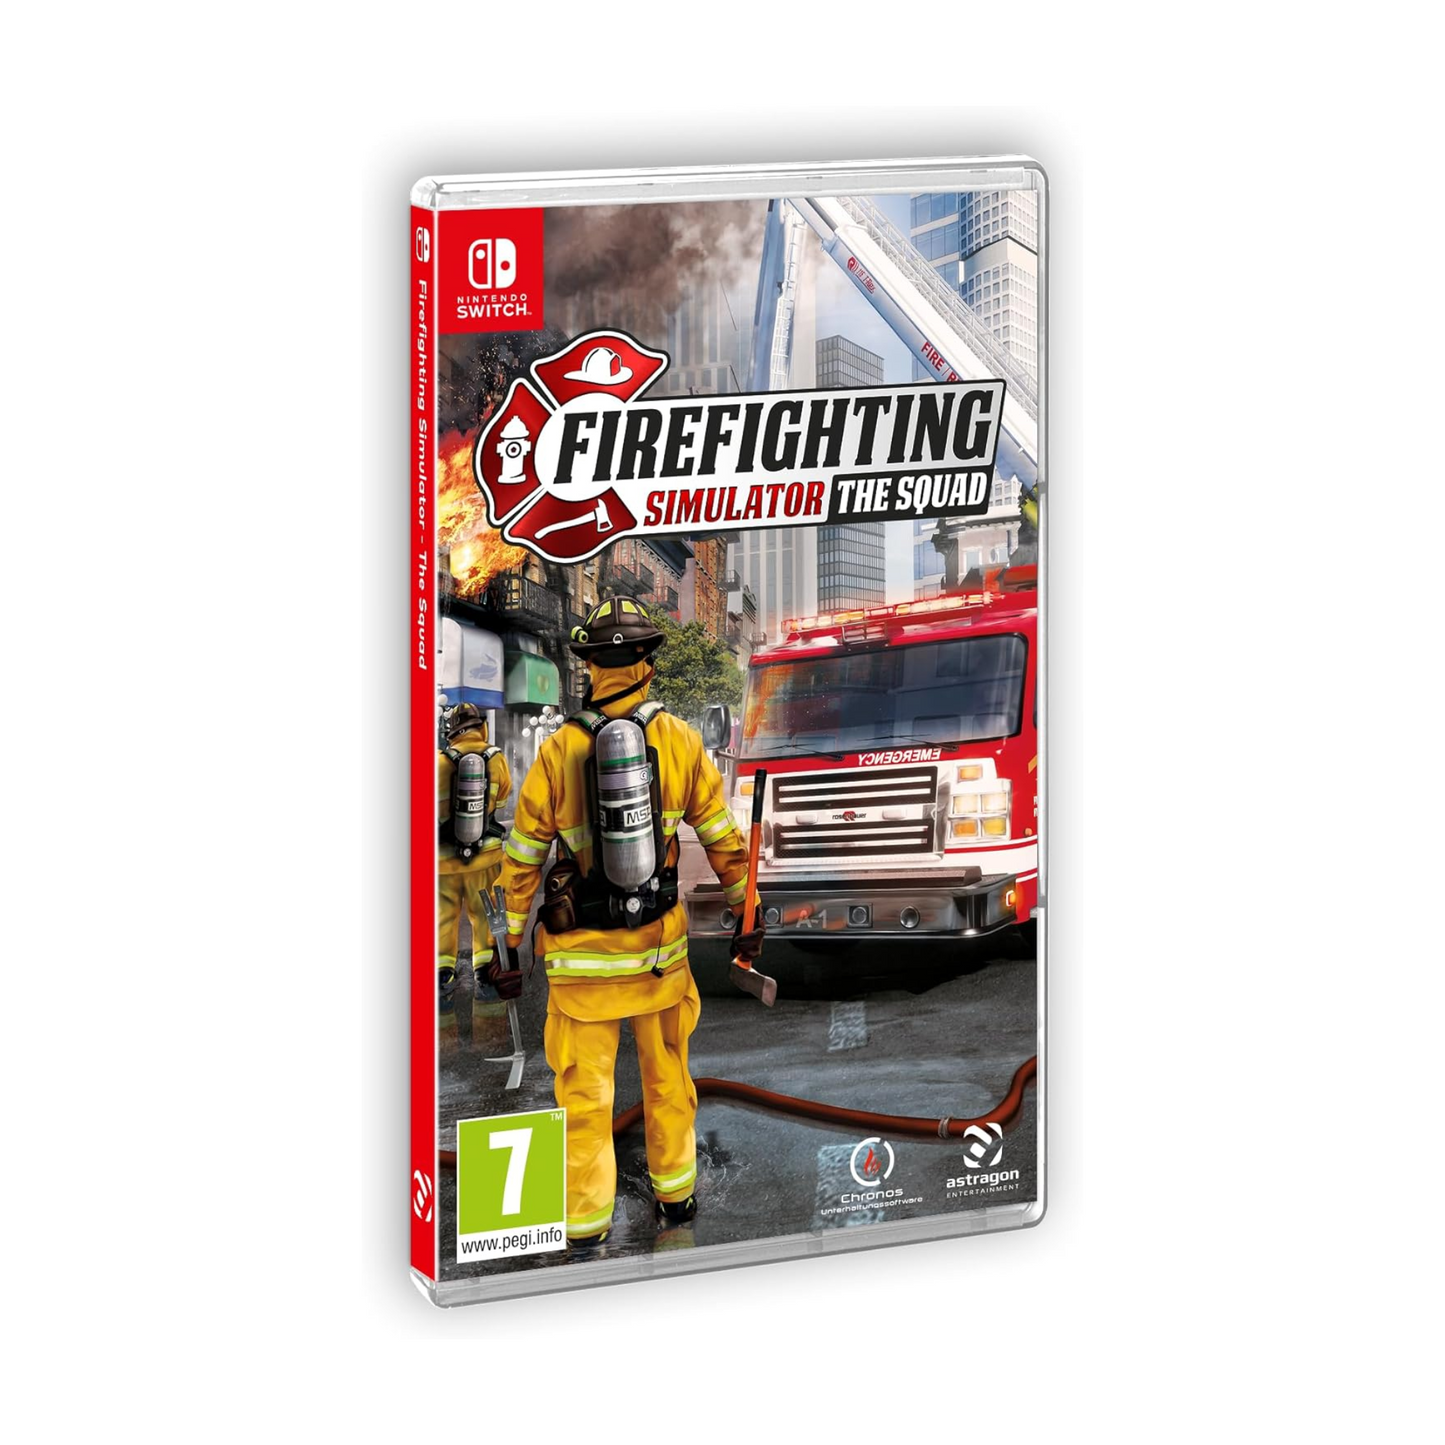 Firefighting Simulator - The Squad Video Game for Nintendo Switch